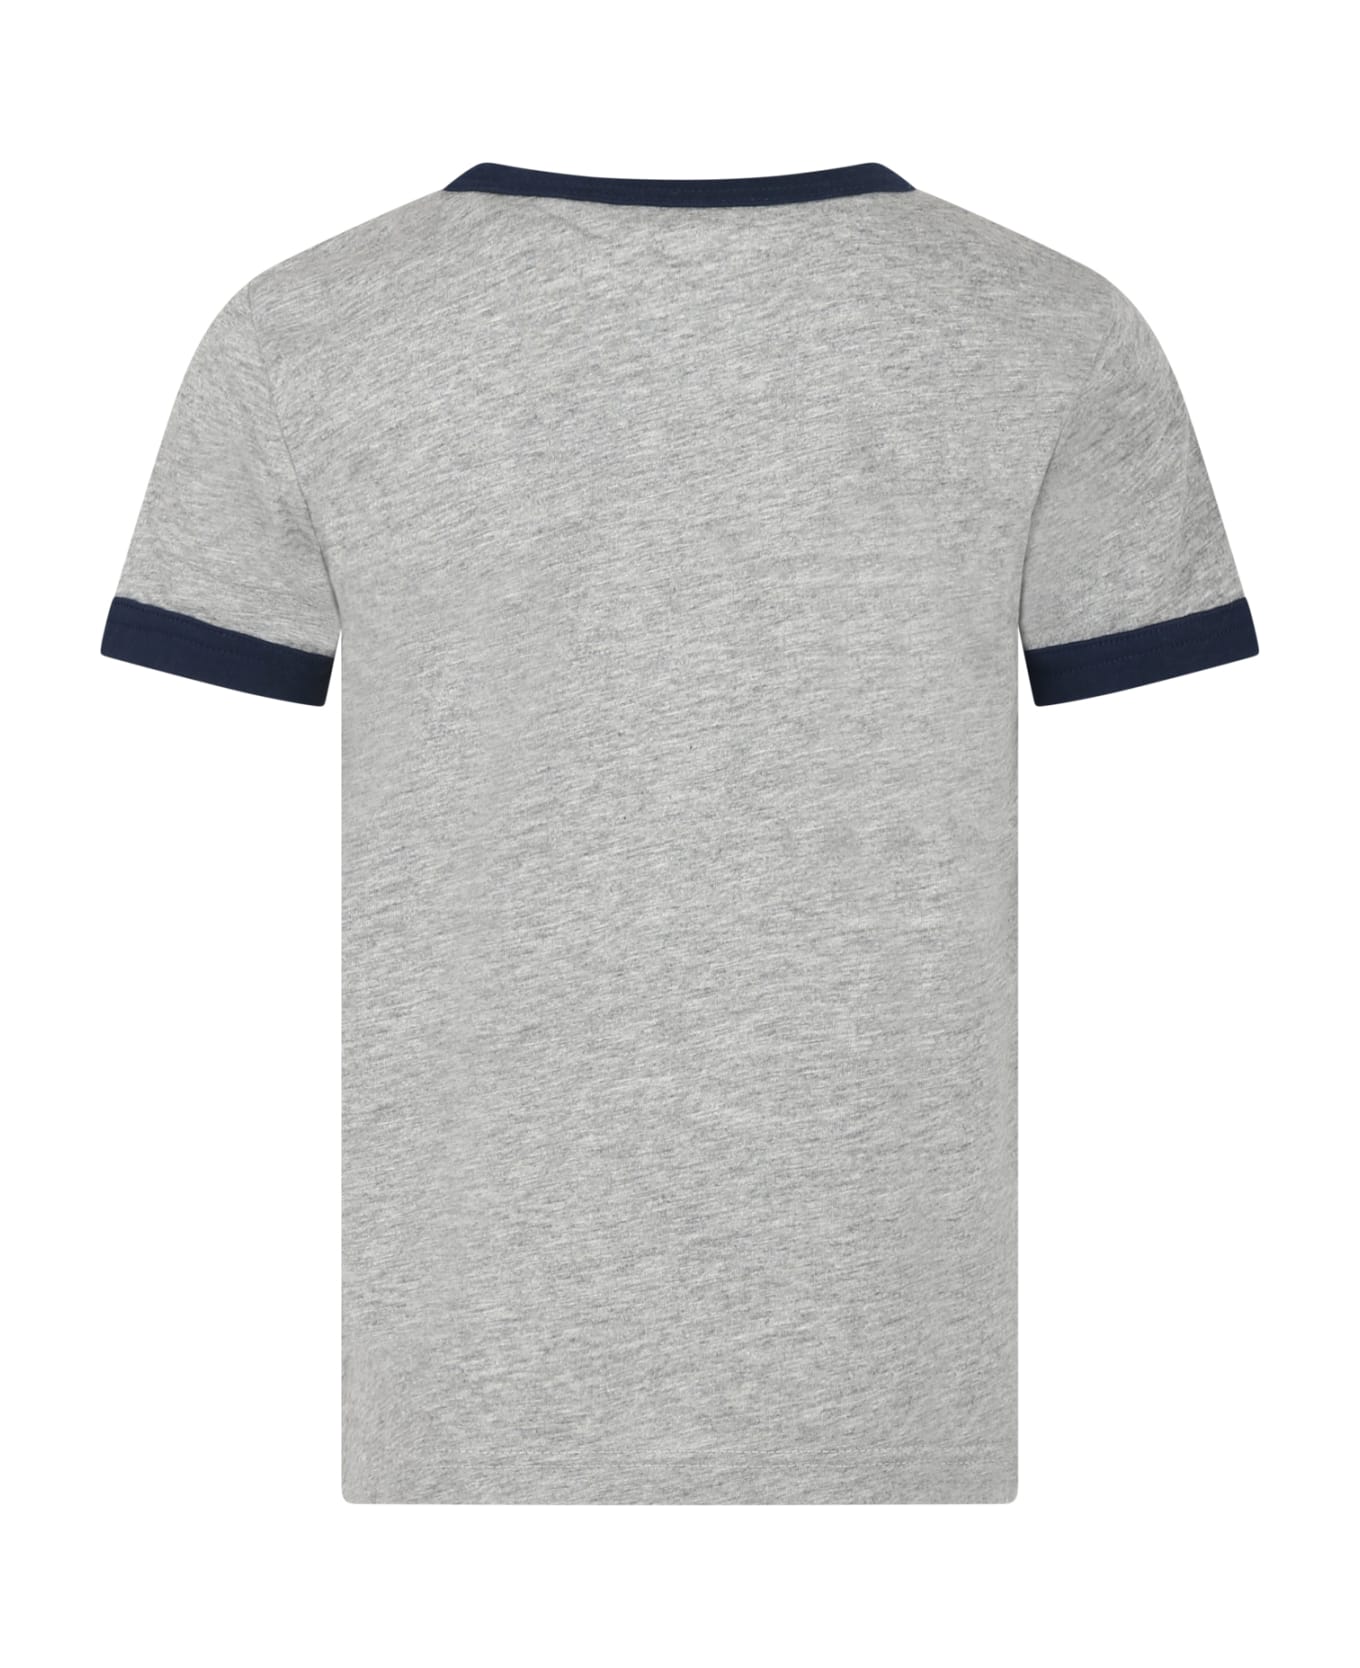 Levi's Grey T-shirt For Kids With Logo - Grey Tシャツ＆ポロシャツ